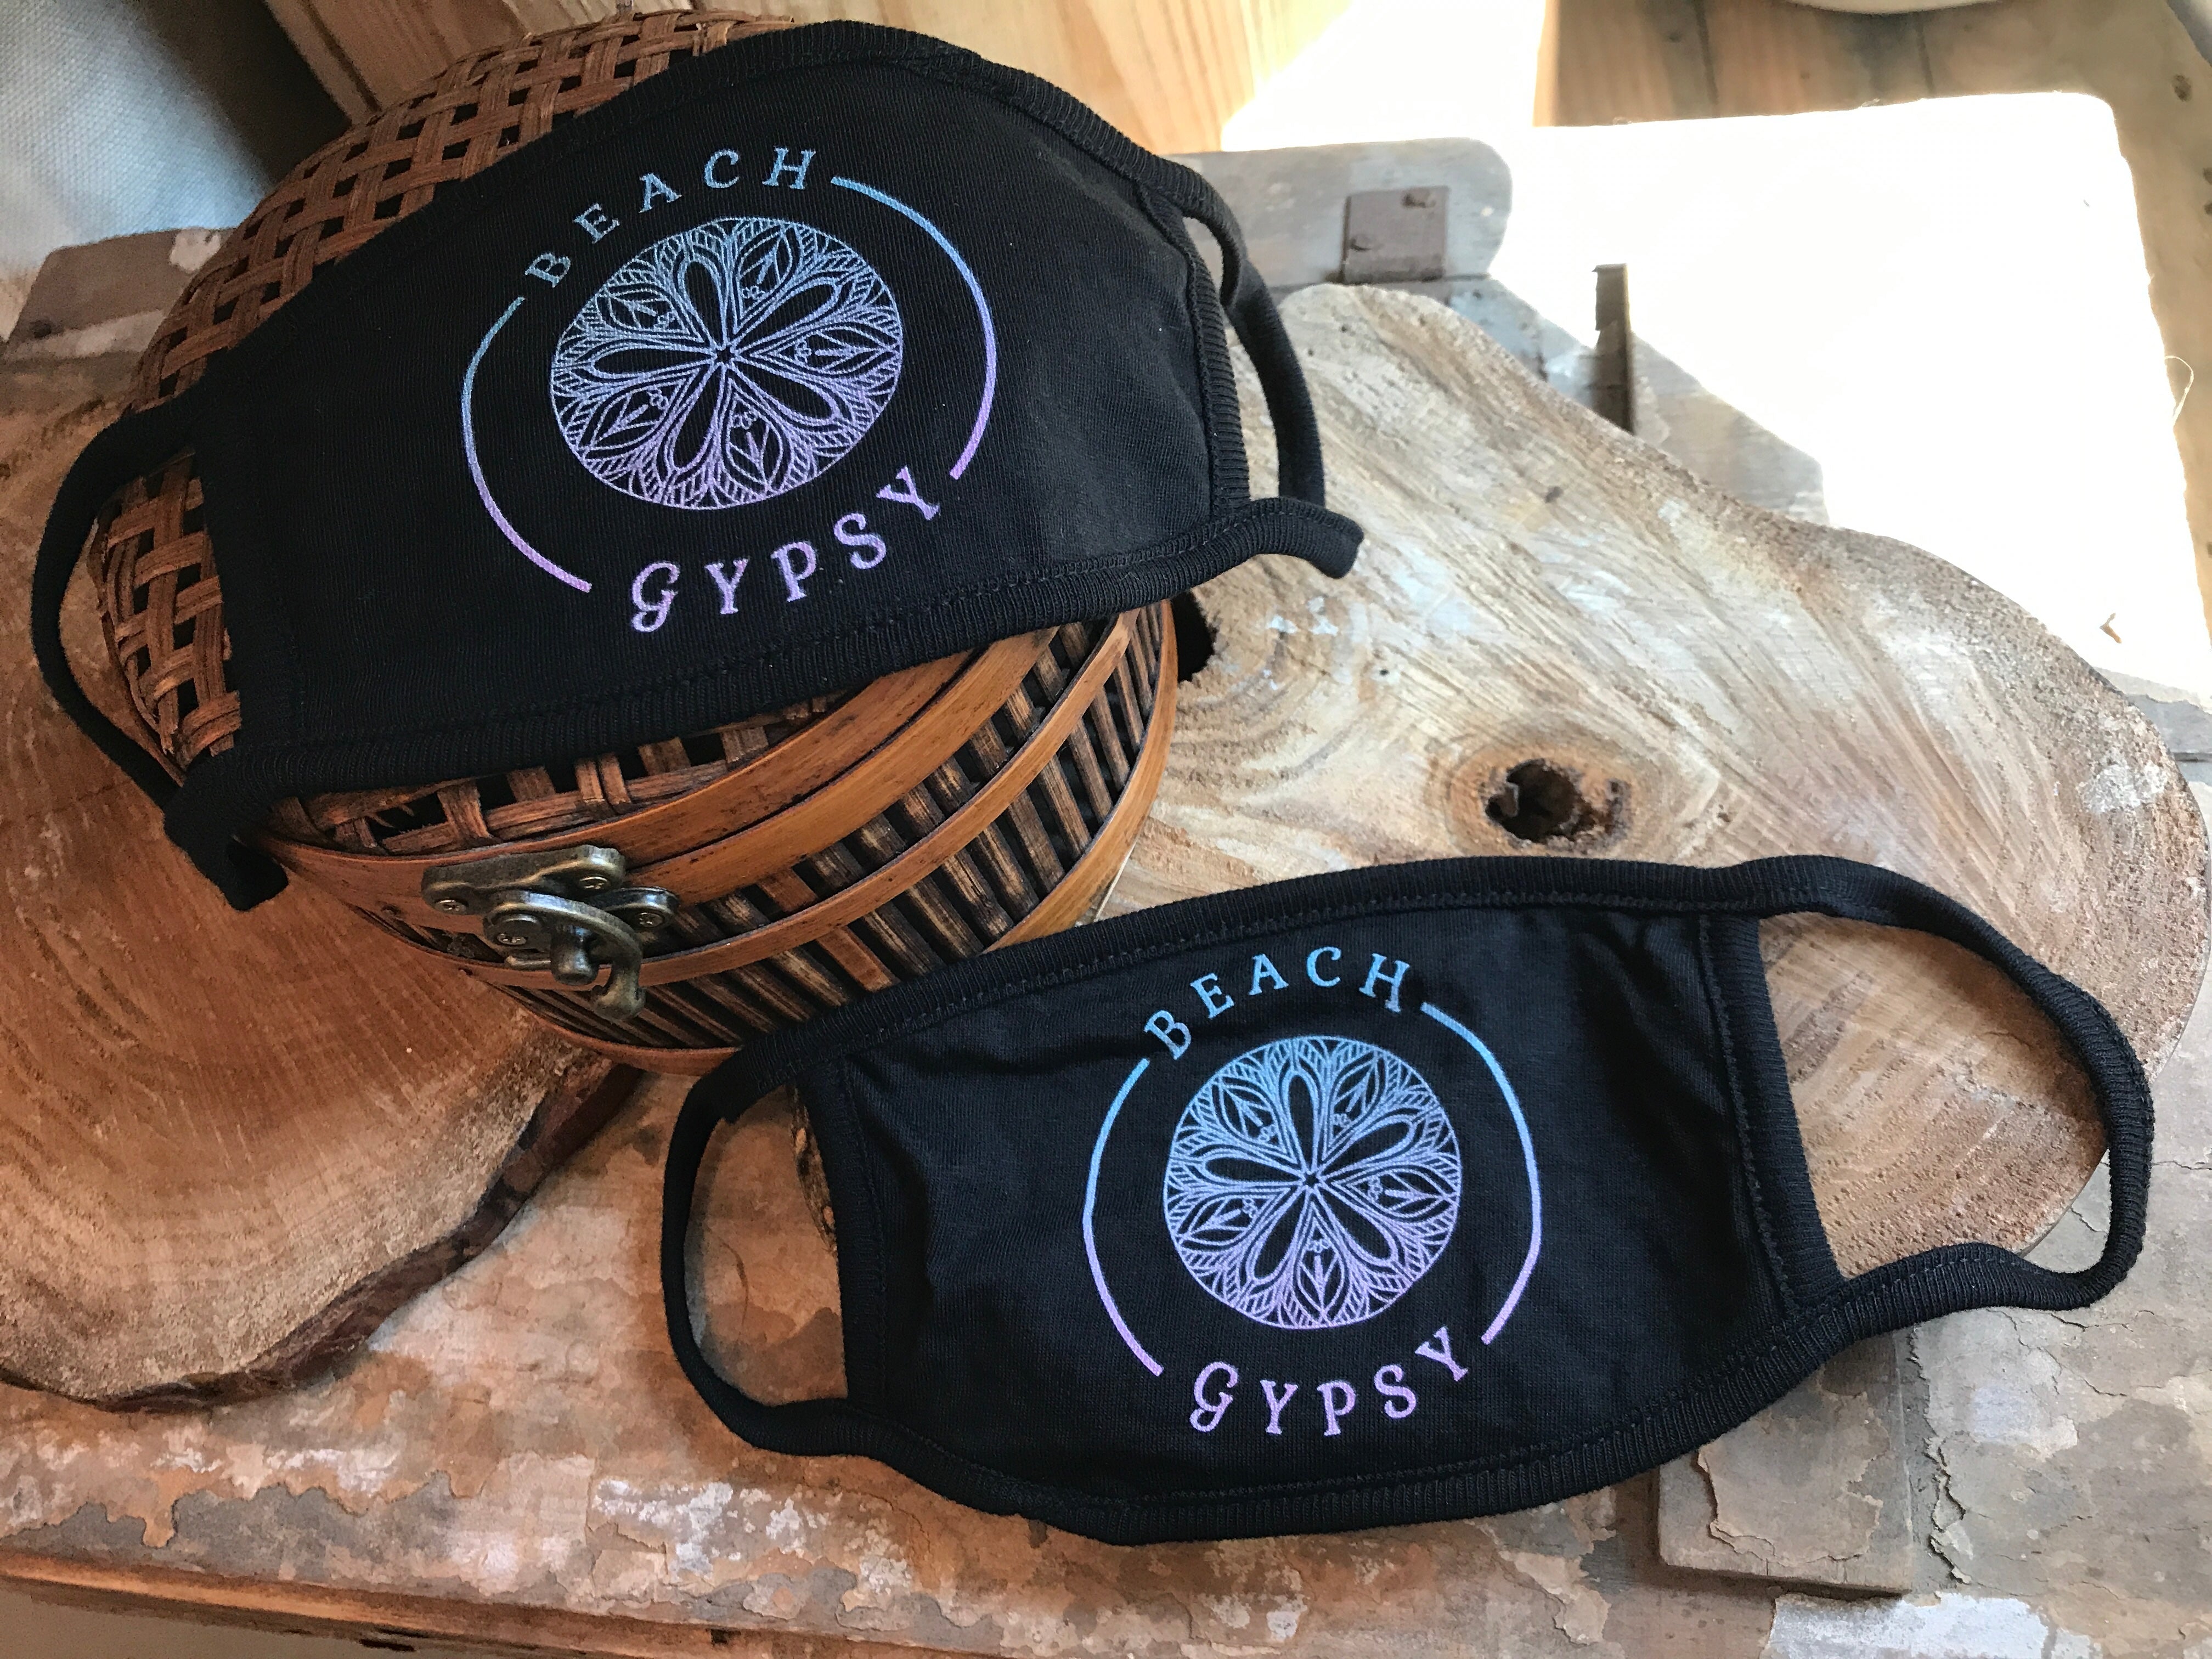 Beach Gypsy Face Covering Mask